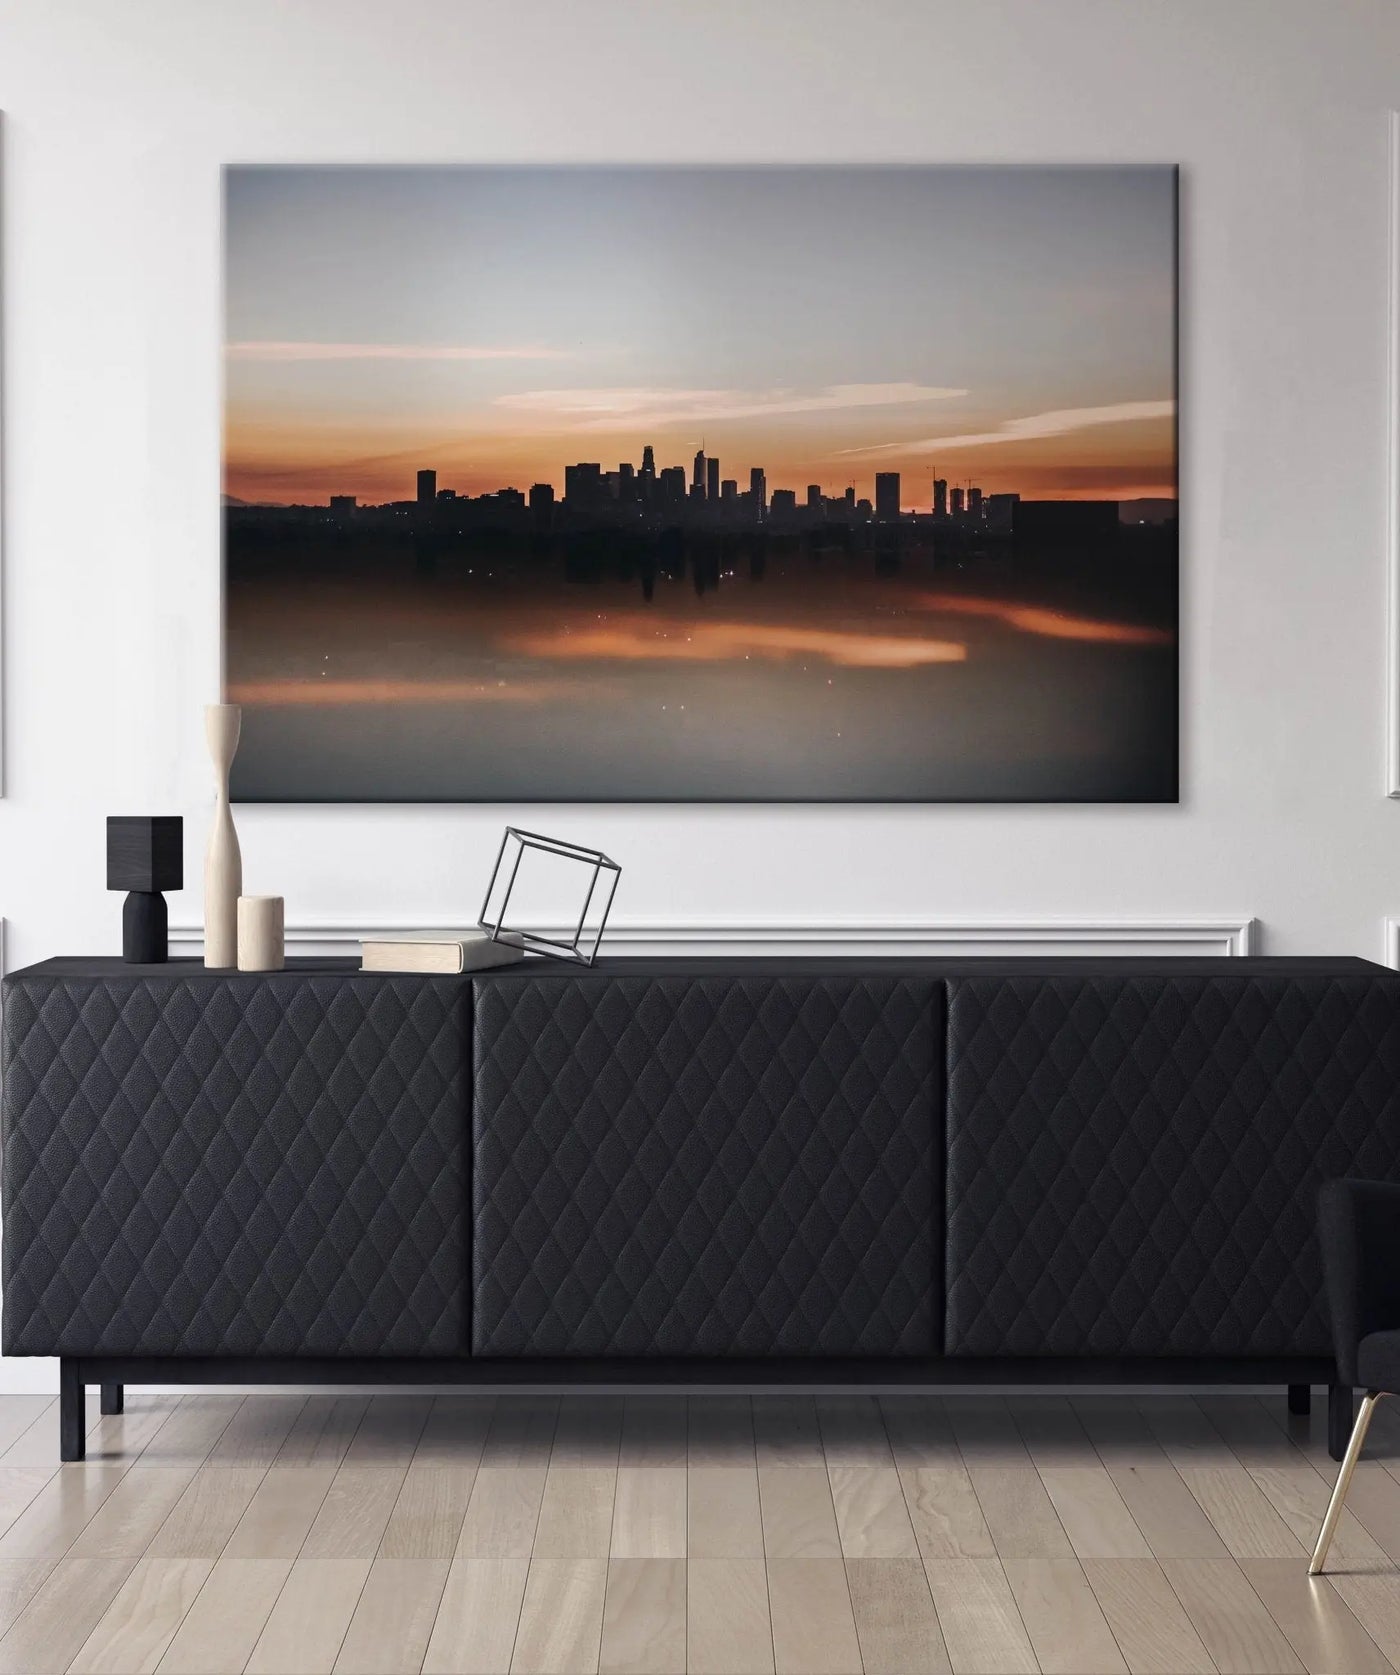 "CITY SUNSET" - Art For Everyone